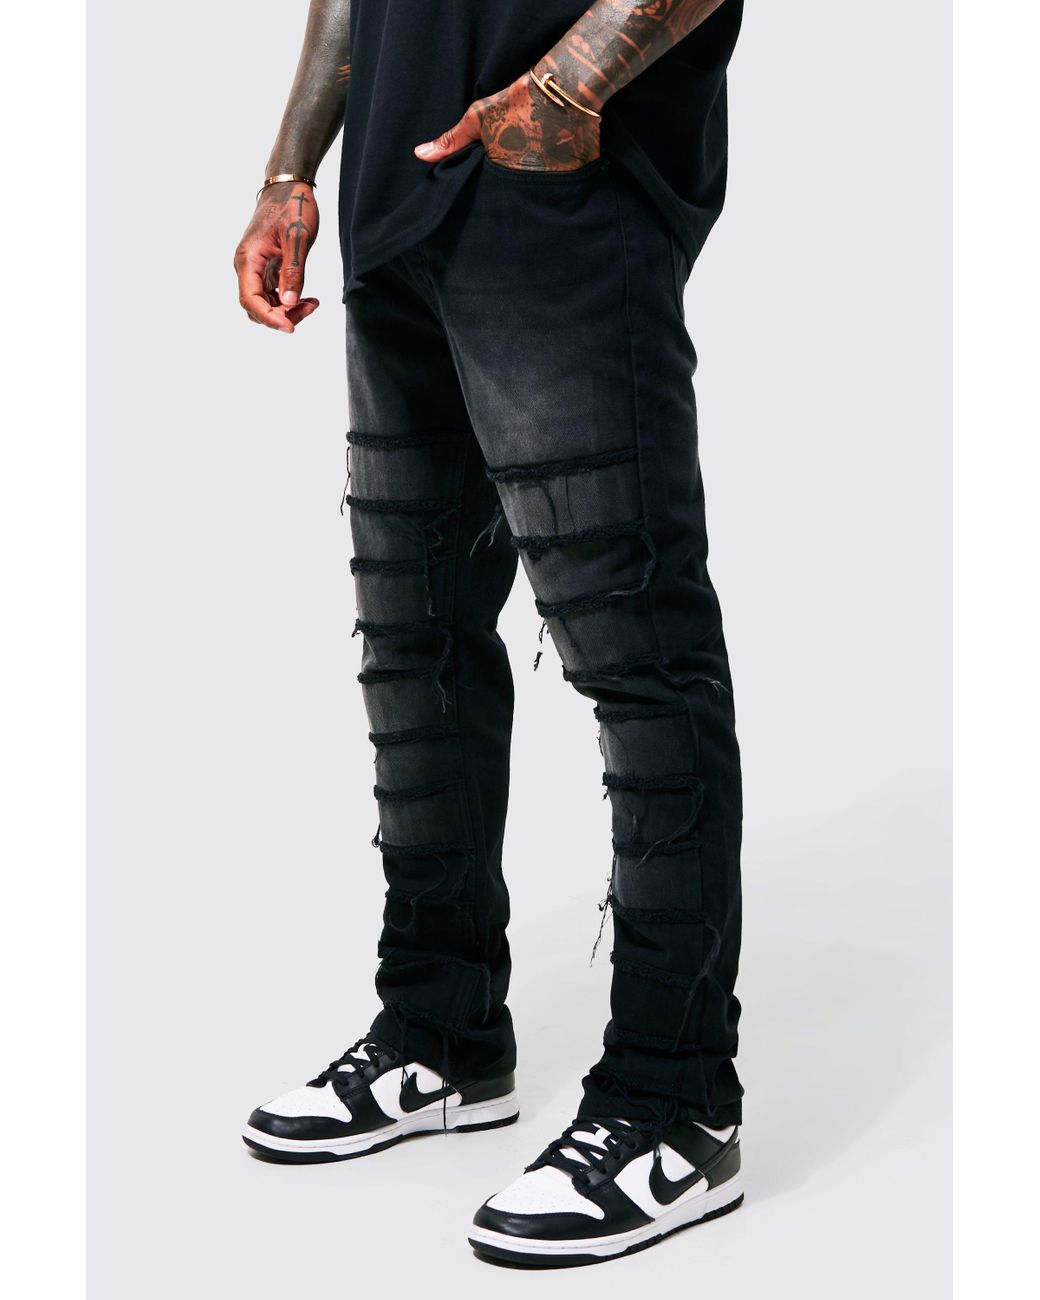 BoohooMAN Denim Stacked Flare Diagonal Distressed Jeans in Black for Men |  Lyst